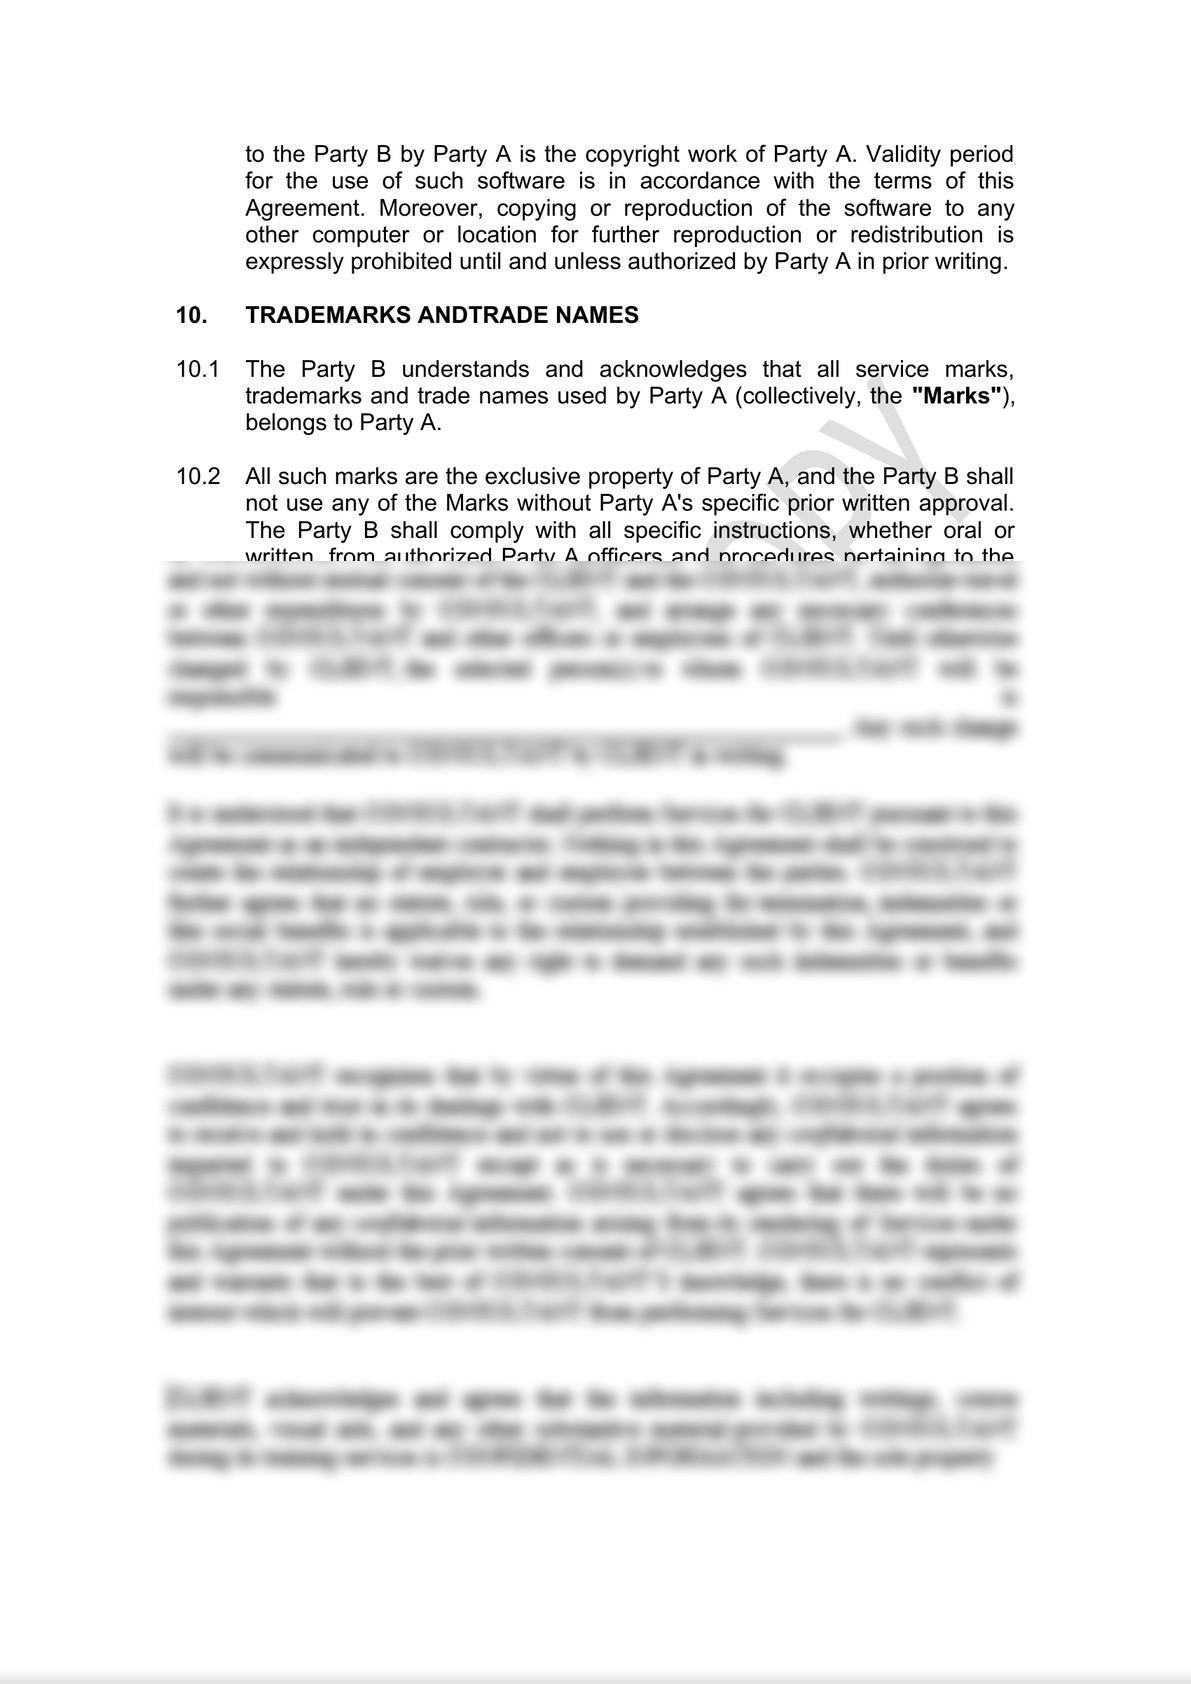 Direct Agency Agreement Draft-6